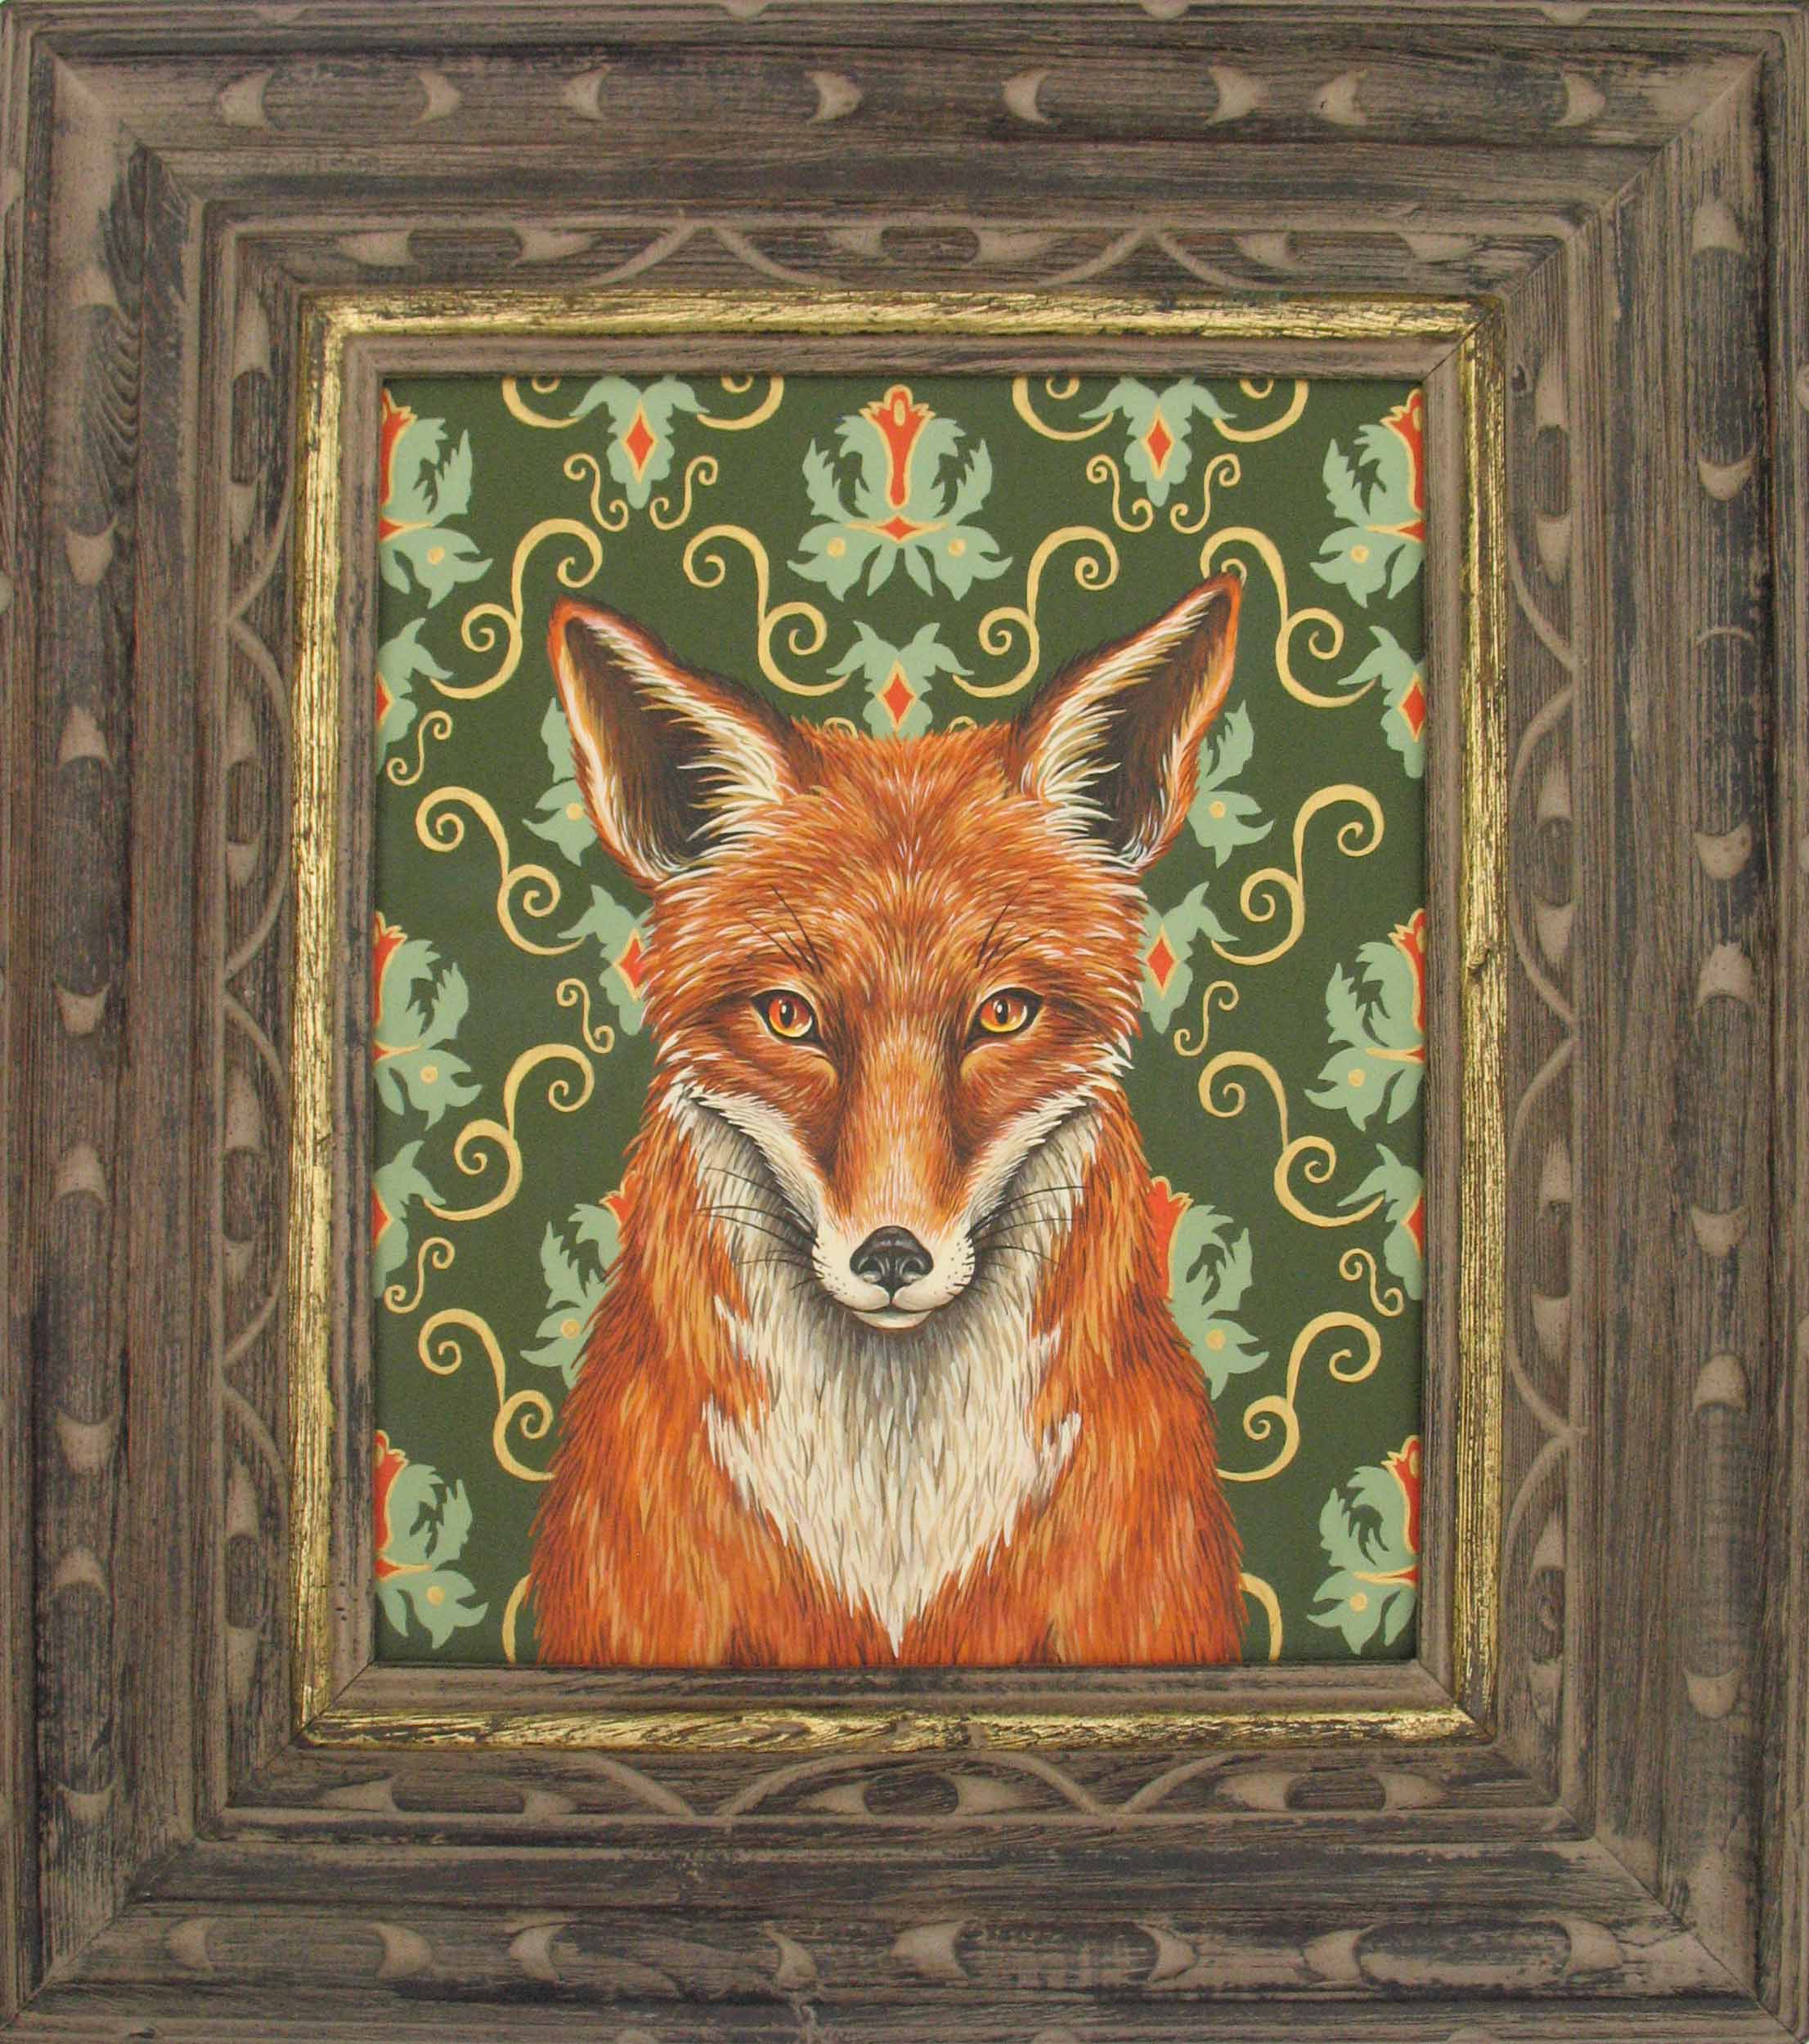   Fox,  Acrylic on wood with vintage frame, 19 x 17 inches (framed)  (private collection) 